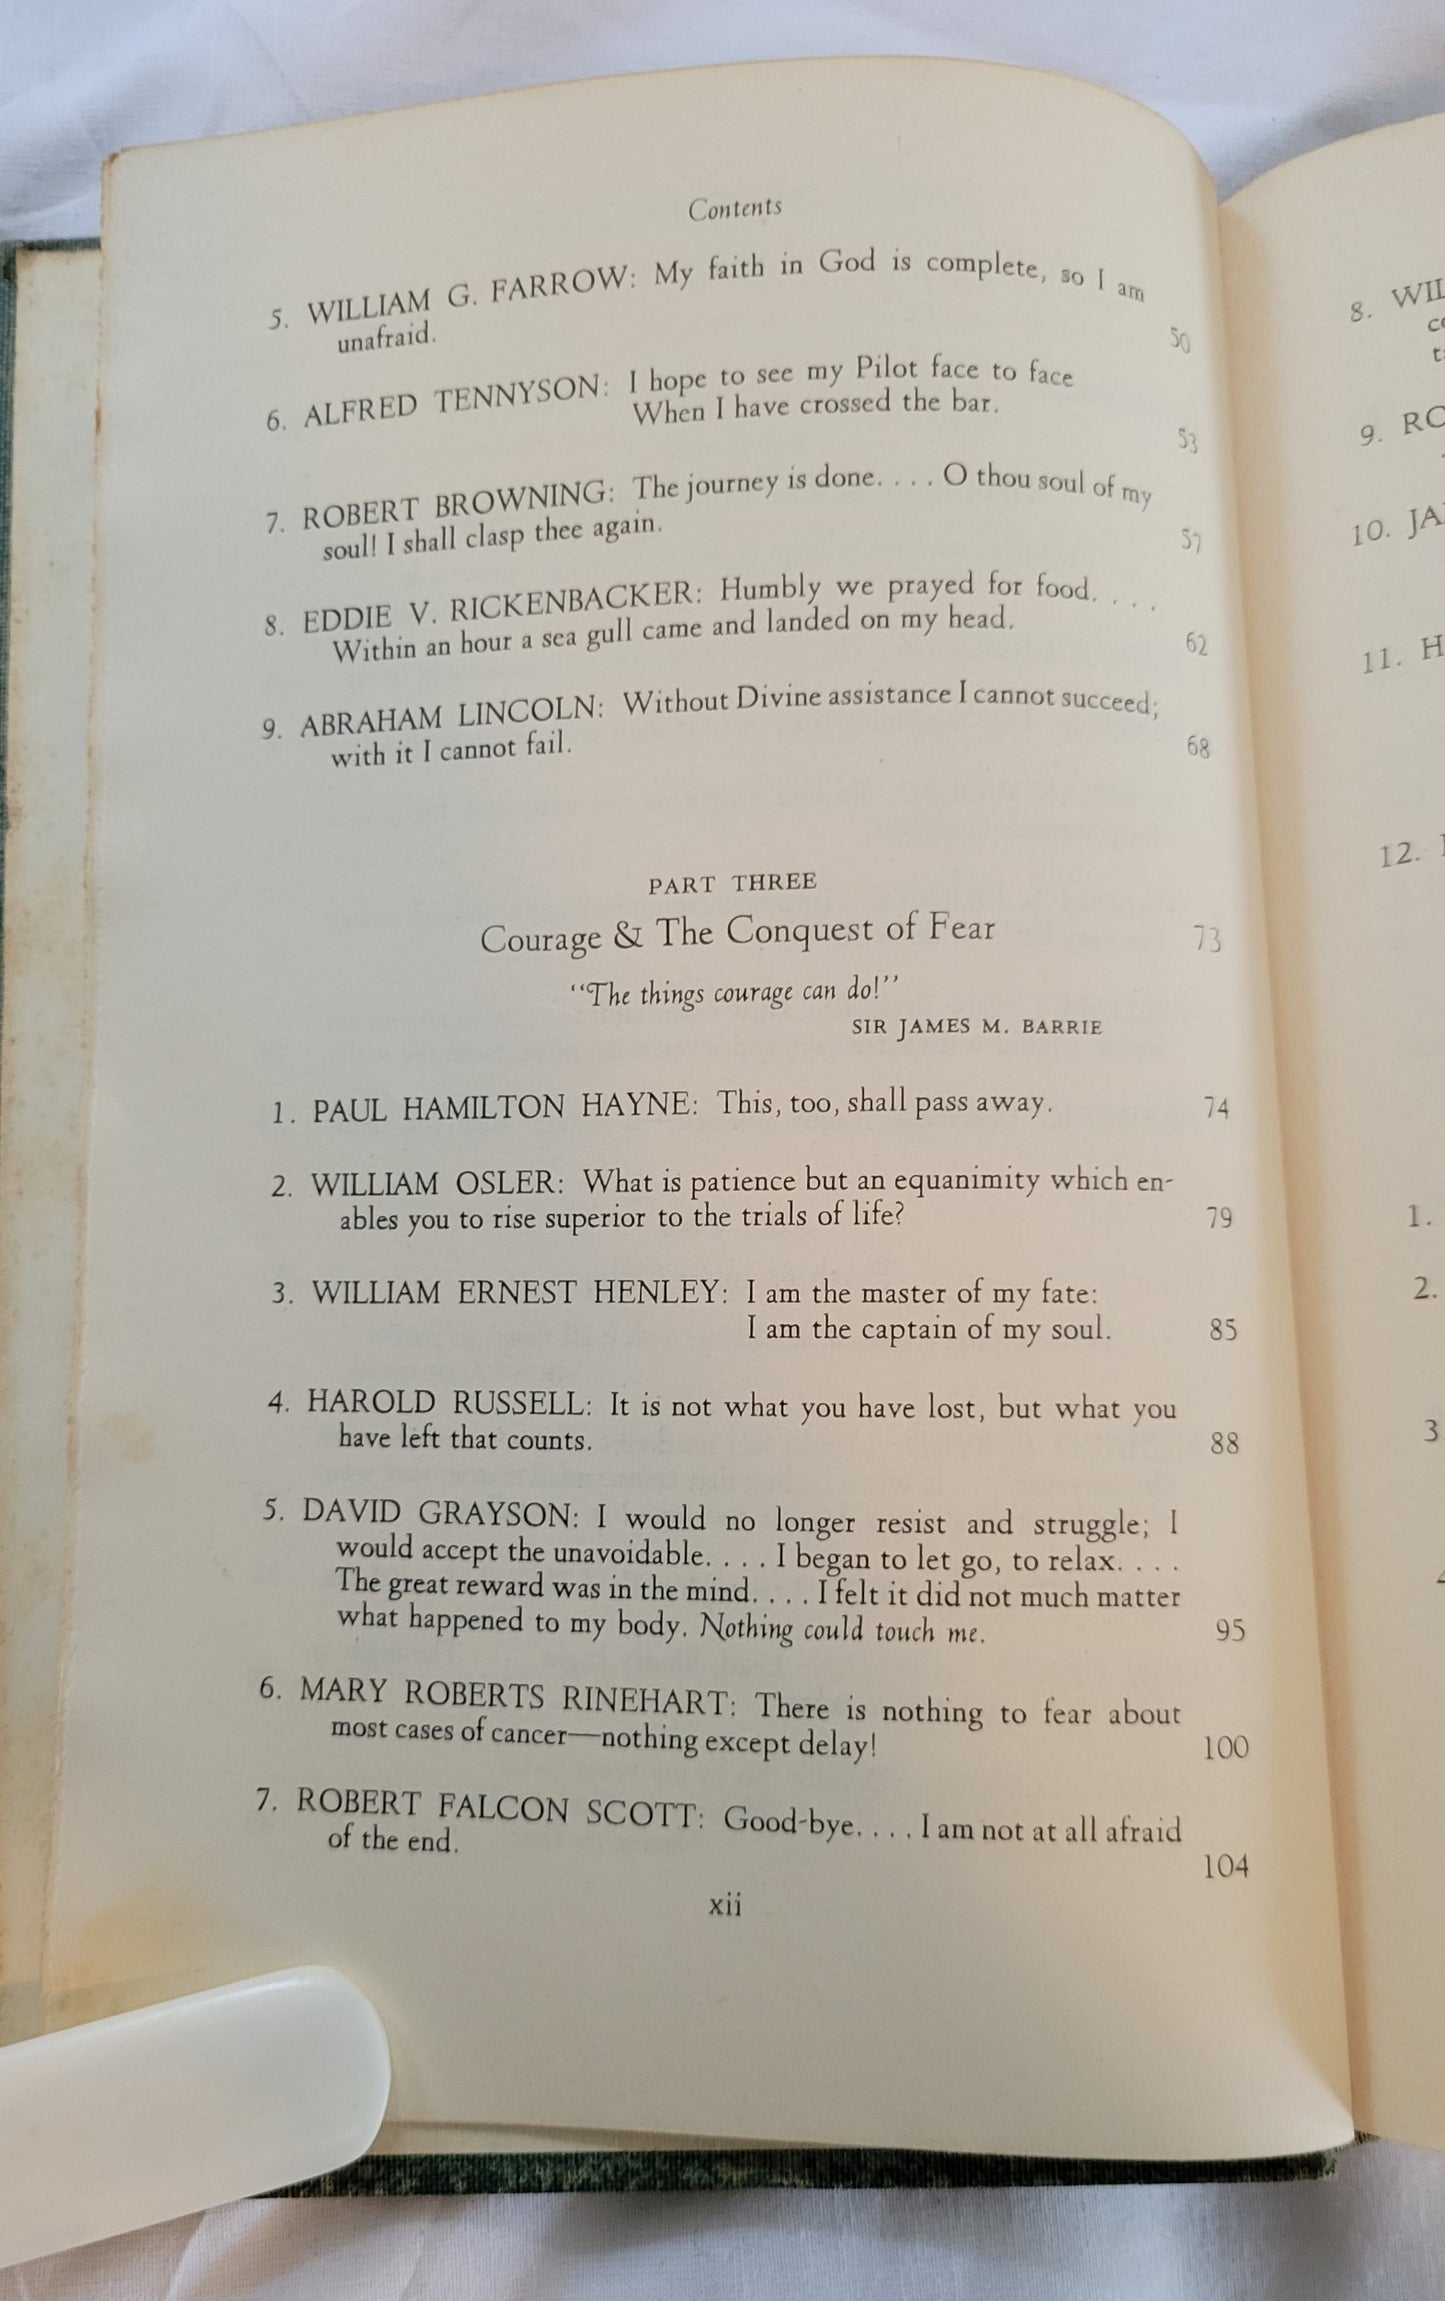 Vintage book for sale, “Light from Many Lamps” edited by Lillian Eichler Watson, 1951, a storehouse of inspired and inspiring reading, it is a collection of brief, stimulating biographies as well.  View of table of contents.